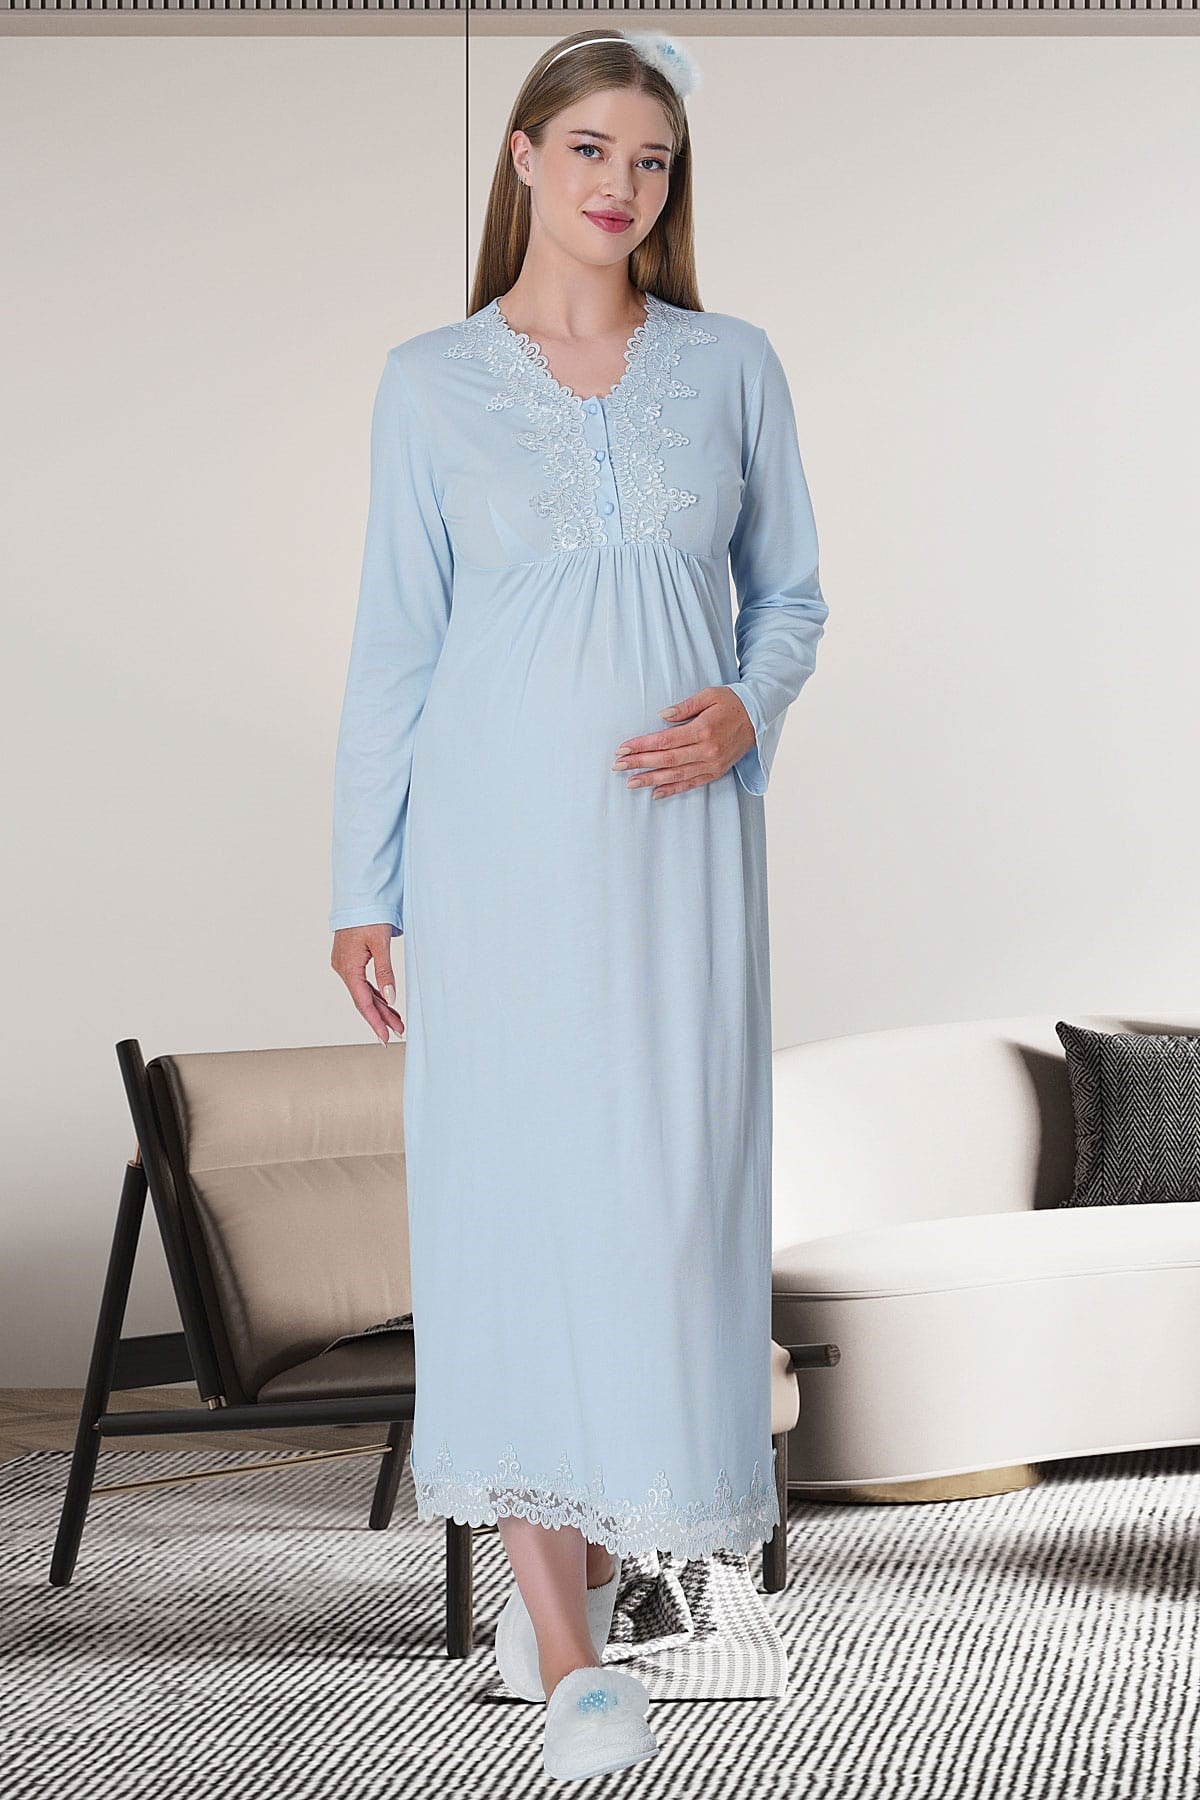 Shopymommy 11113 Woven Long Sleeve Maternity & Nursing Nightgown